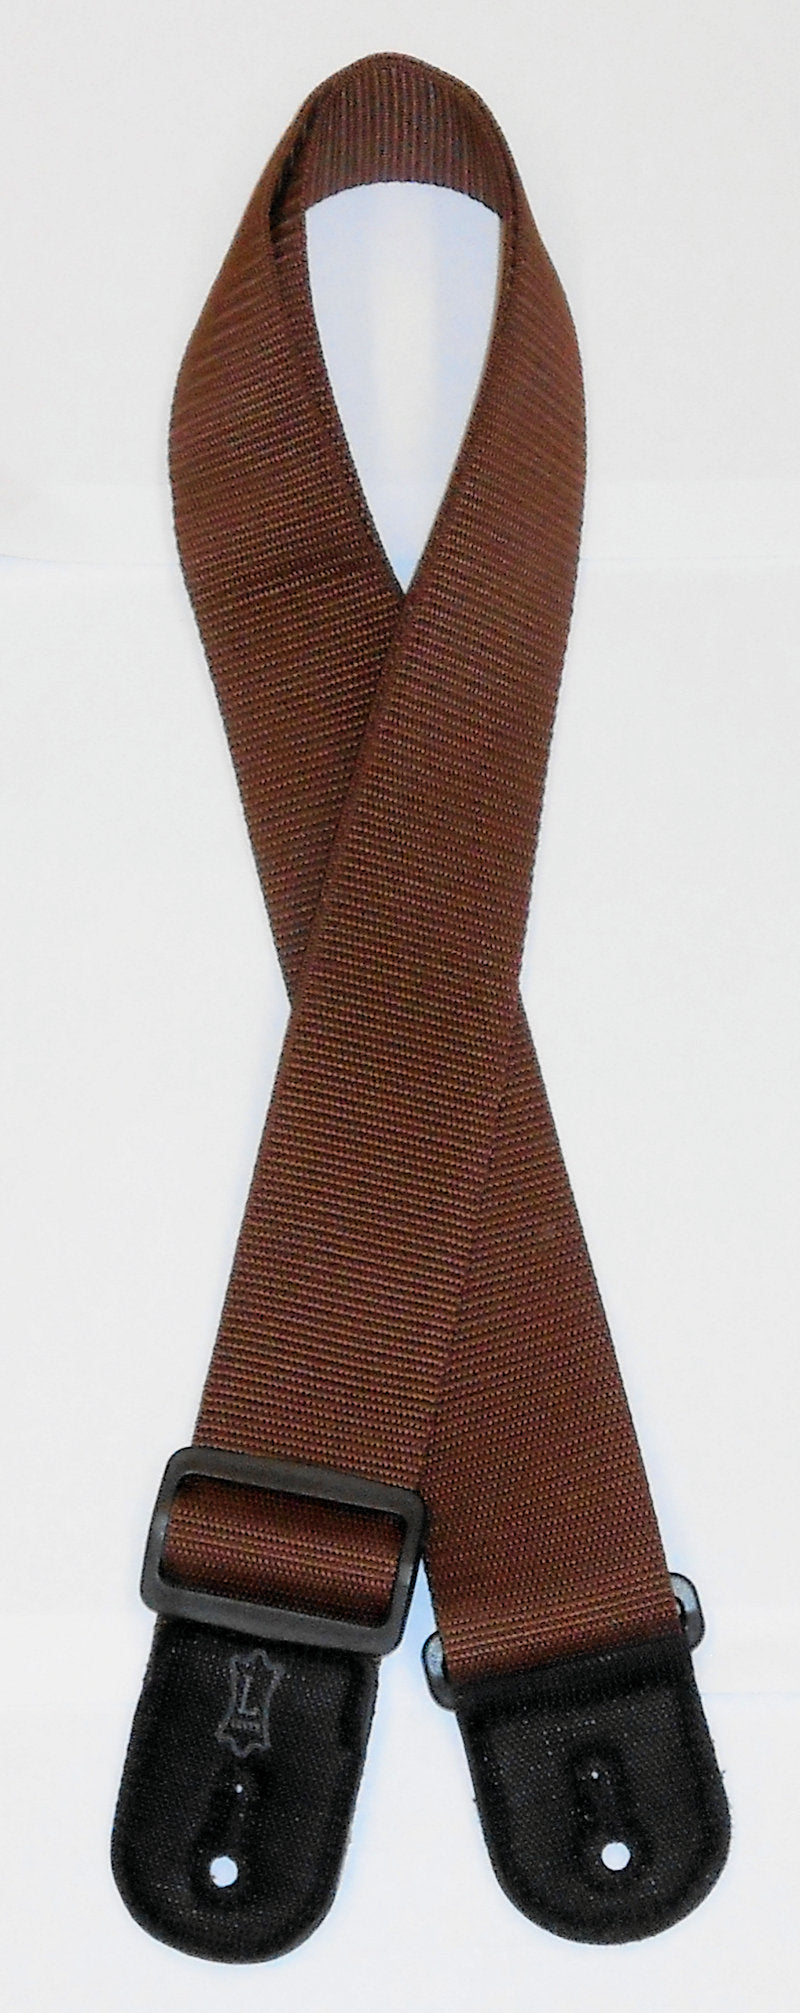 An adjustable Nylon Strap - Brown with a black buckle.